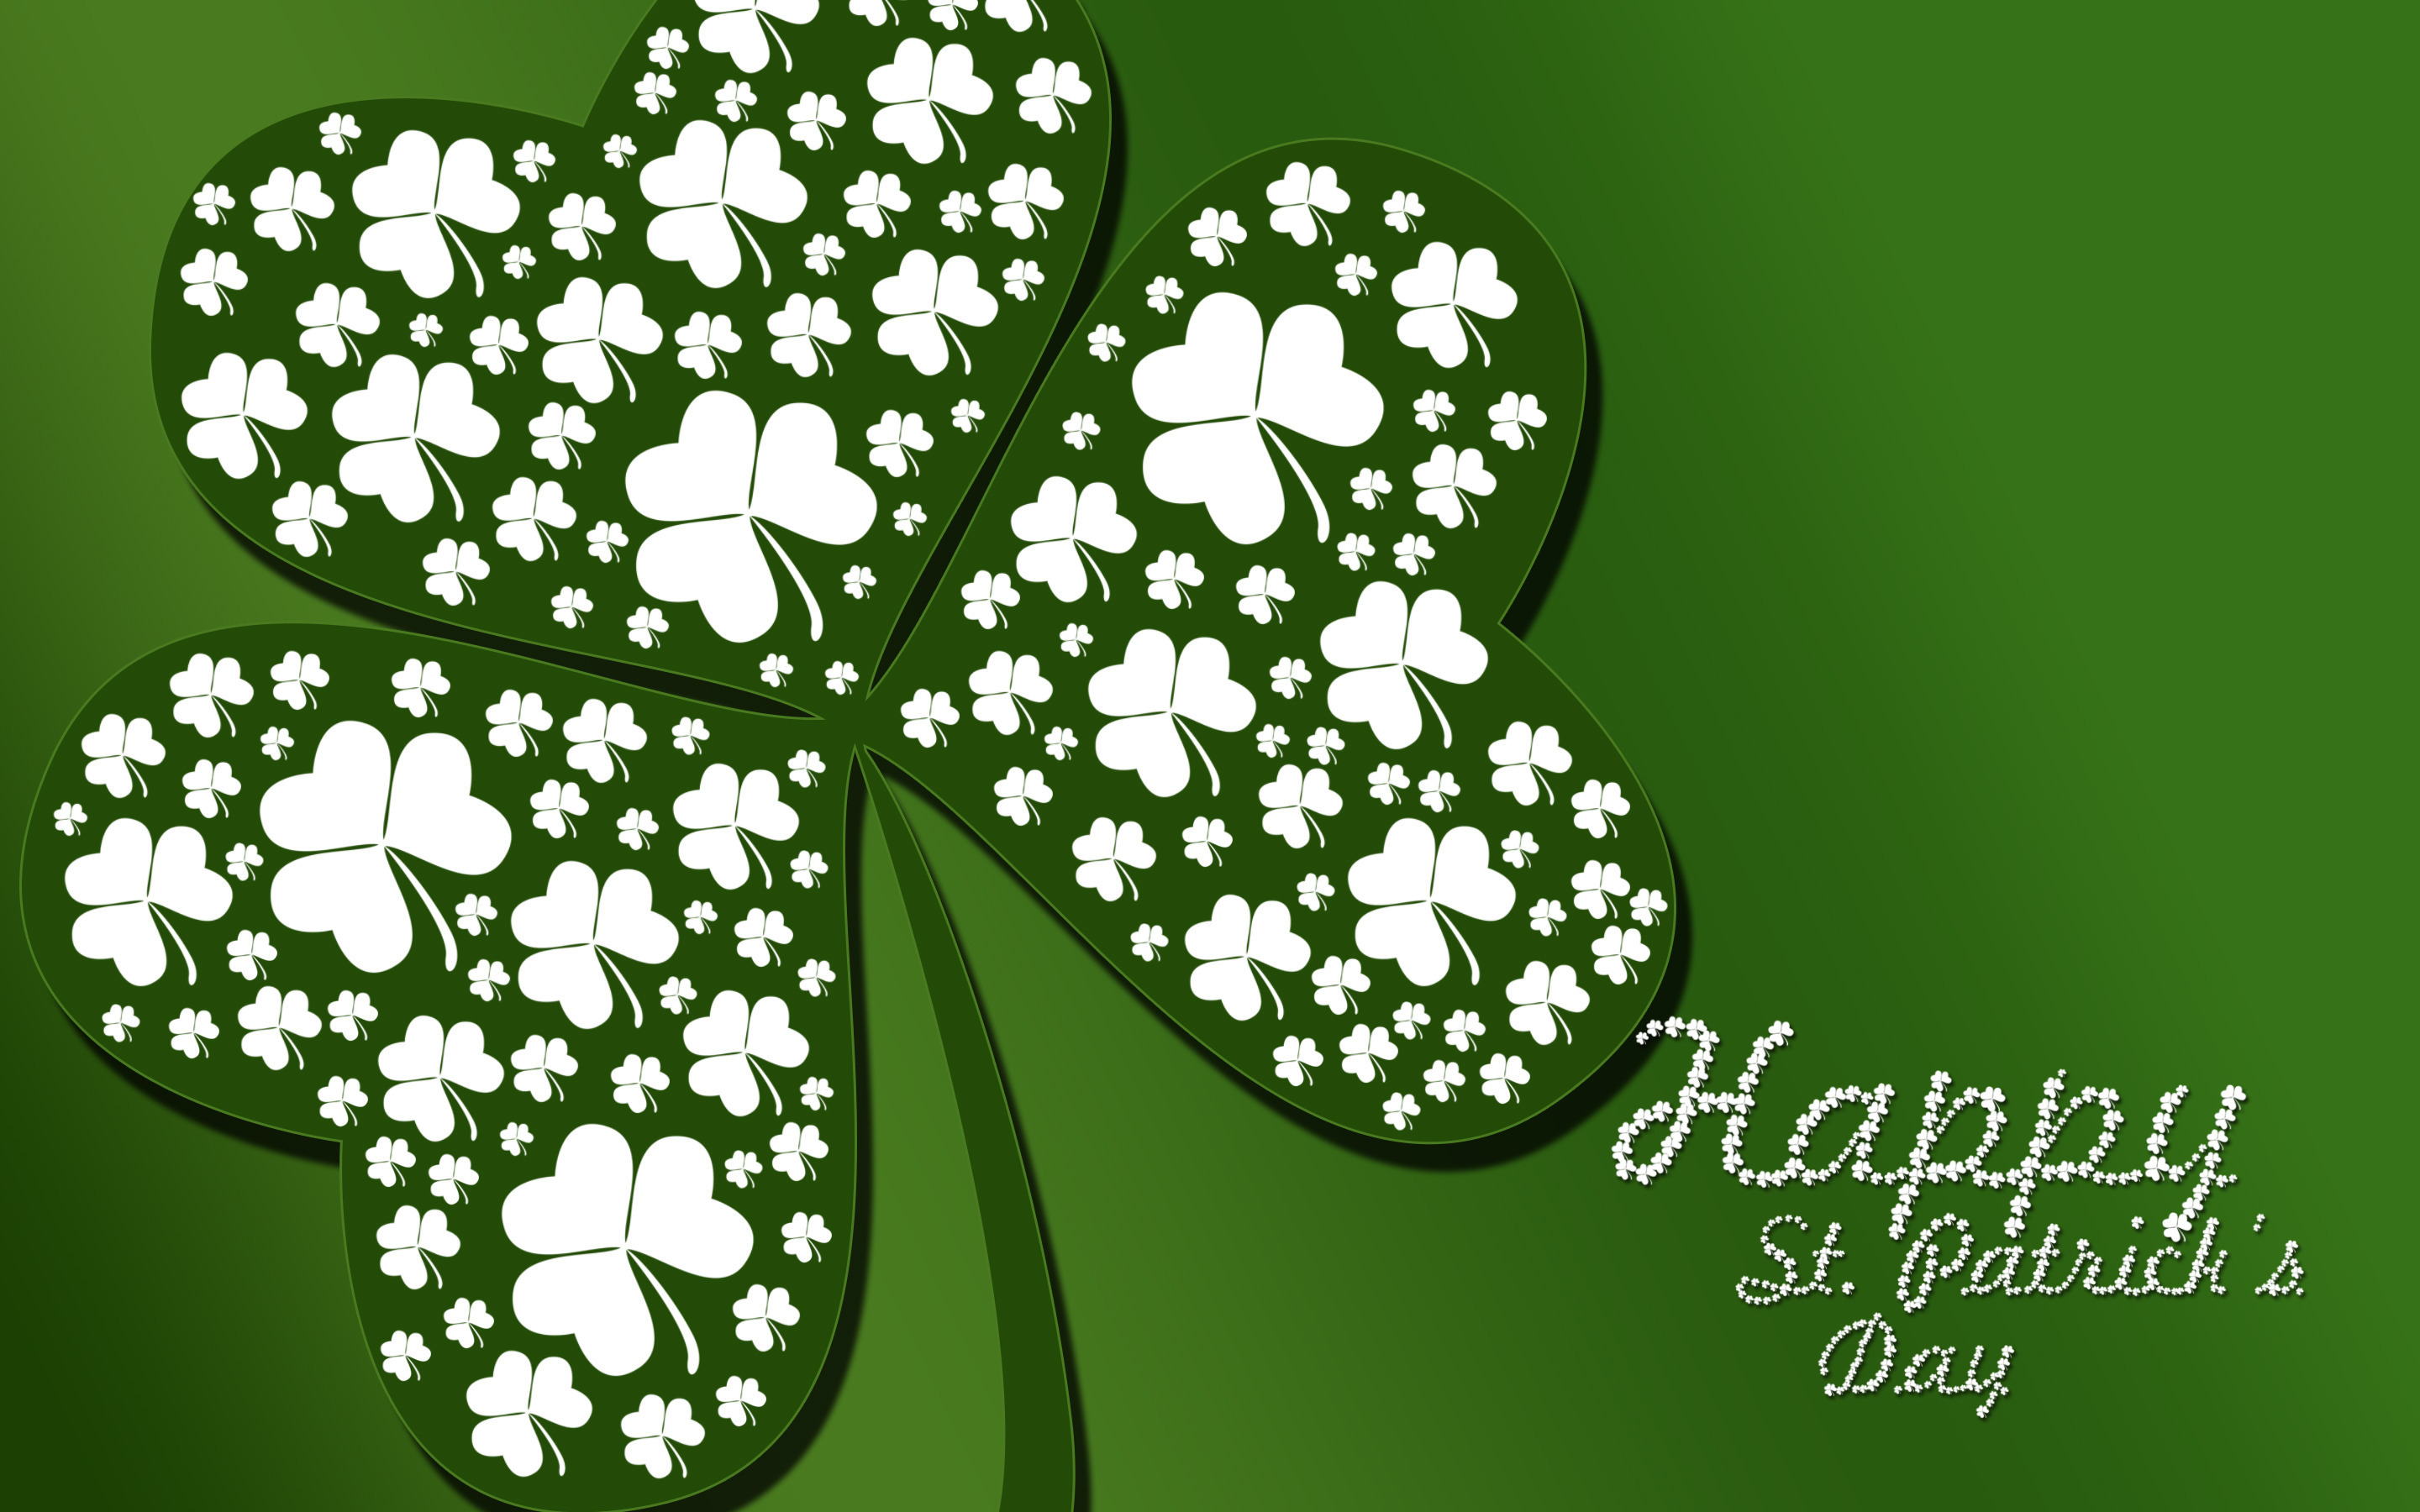 100+] St Patrick's Day Wallpapers